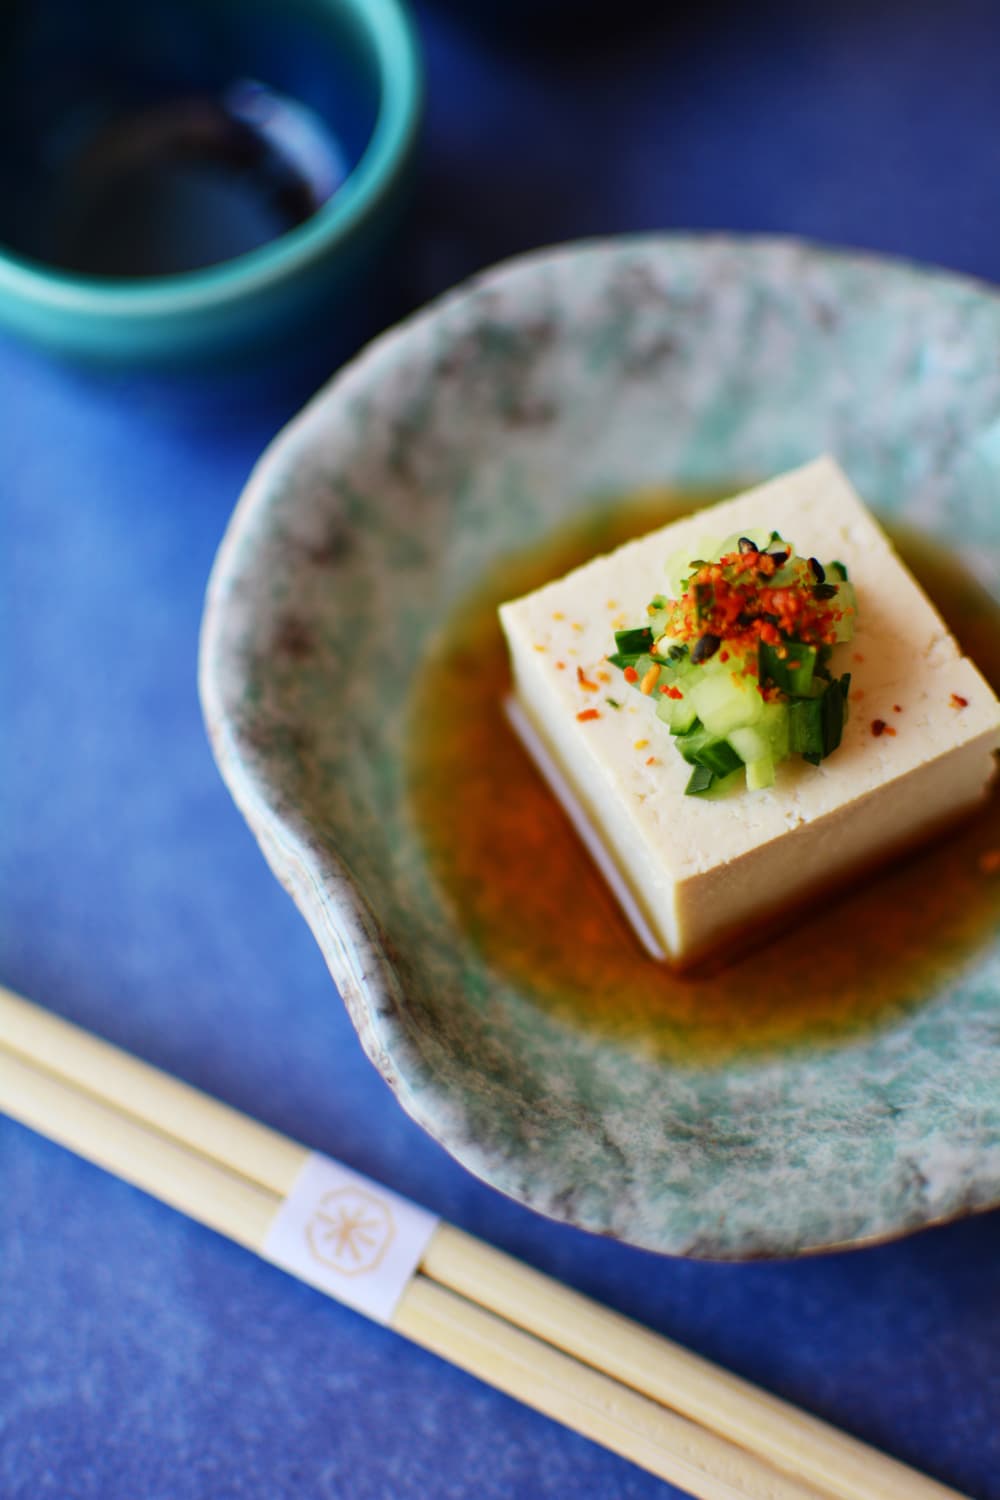 Tofu with cucumber-shichimi sauce presented on the plate